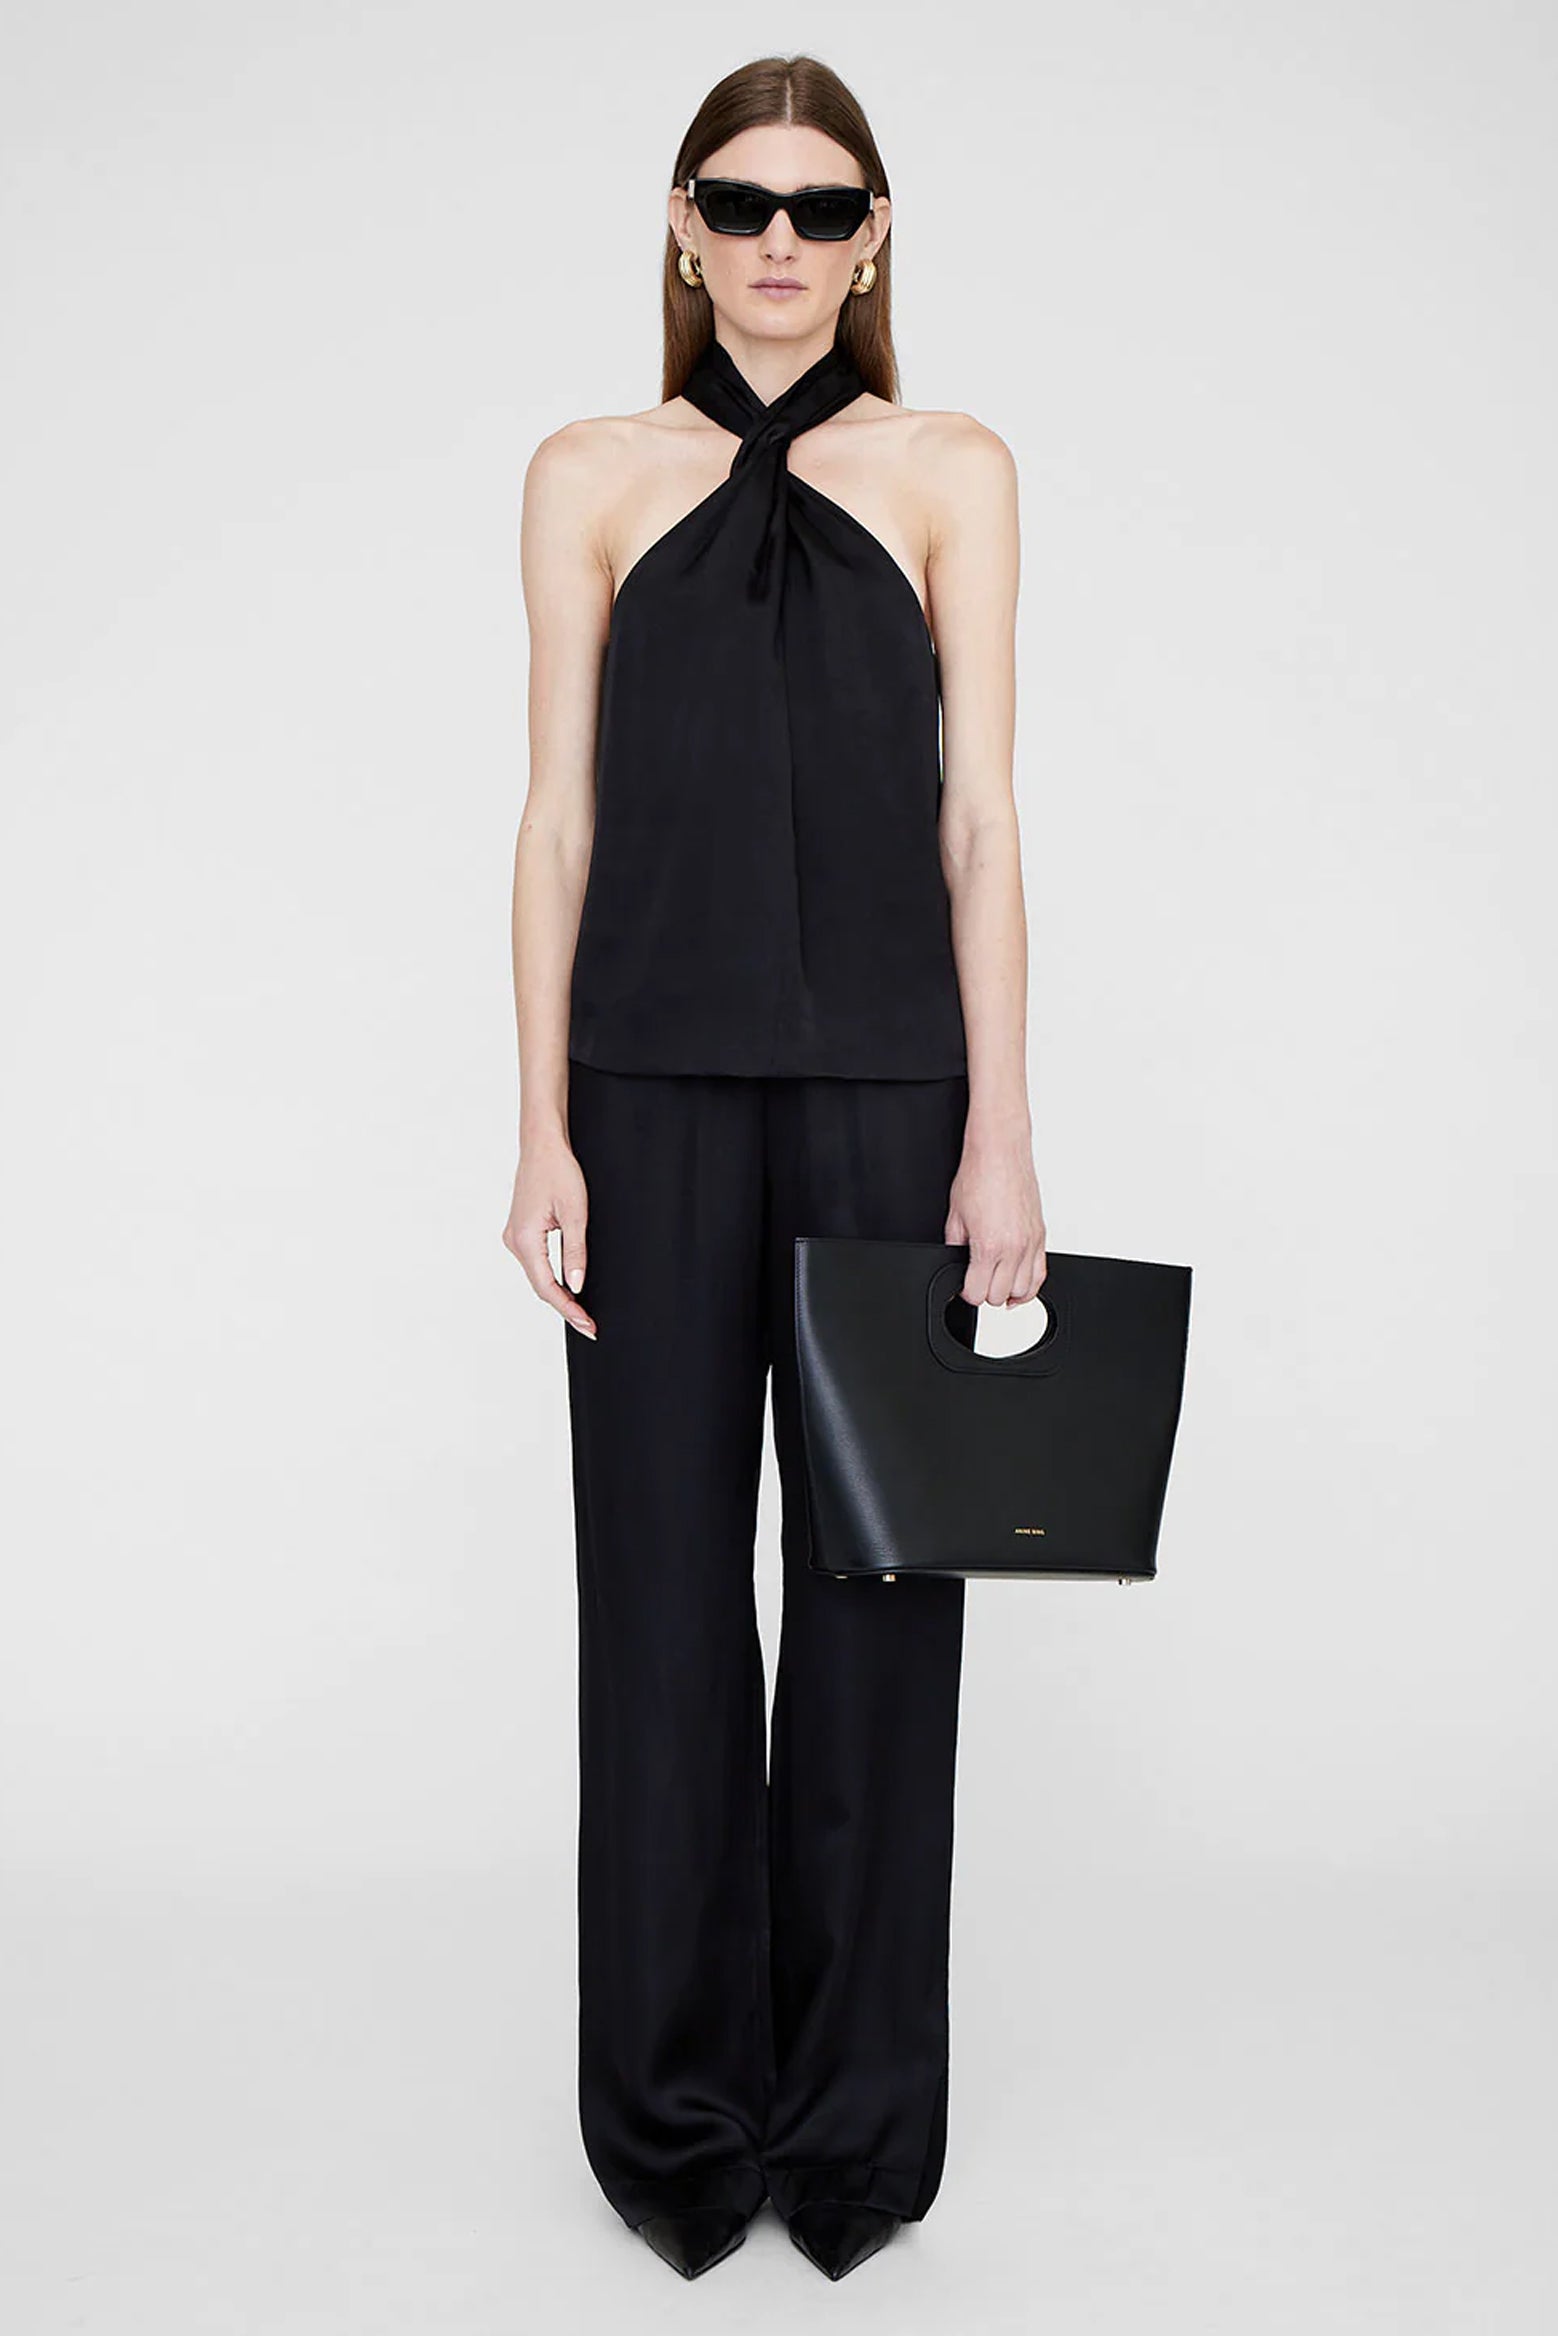 Anine Bing Aden Pant in Black available at The New Trend Australia.